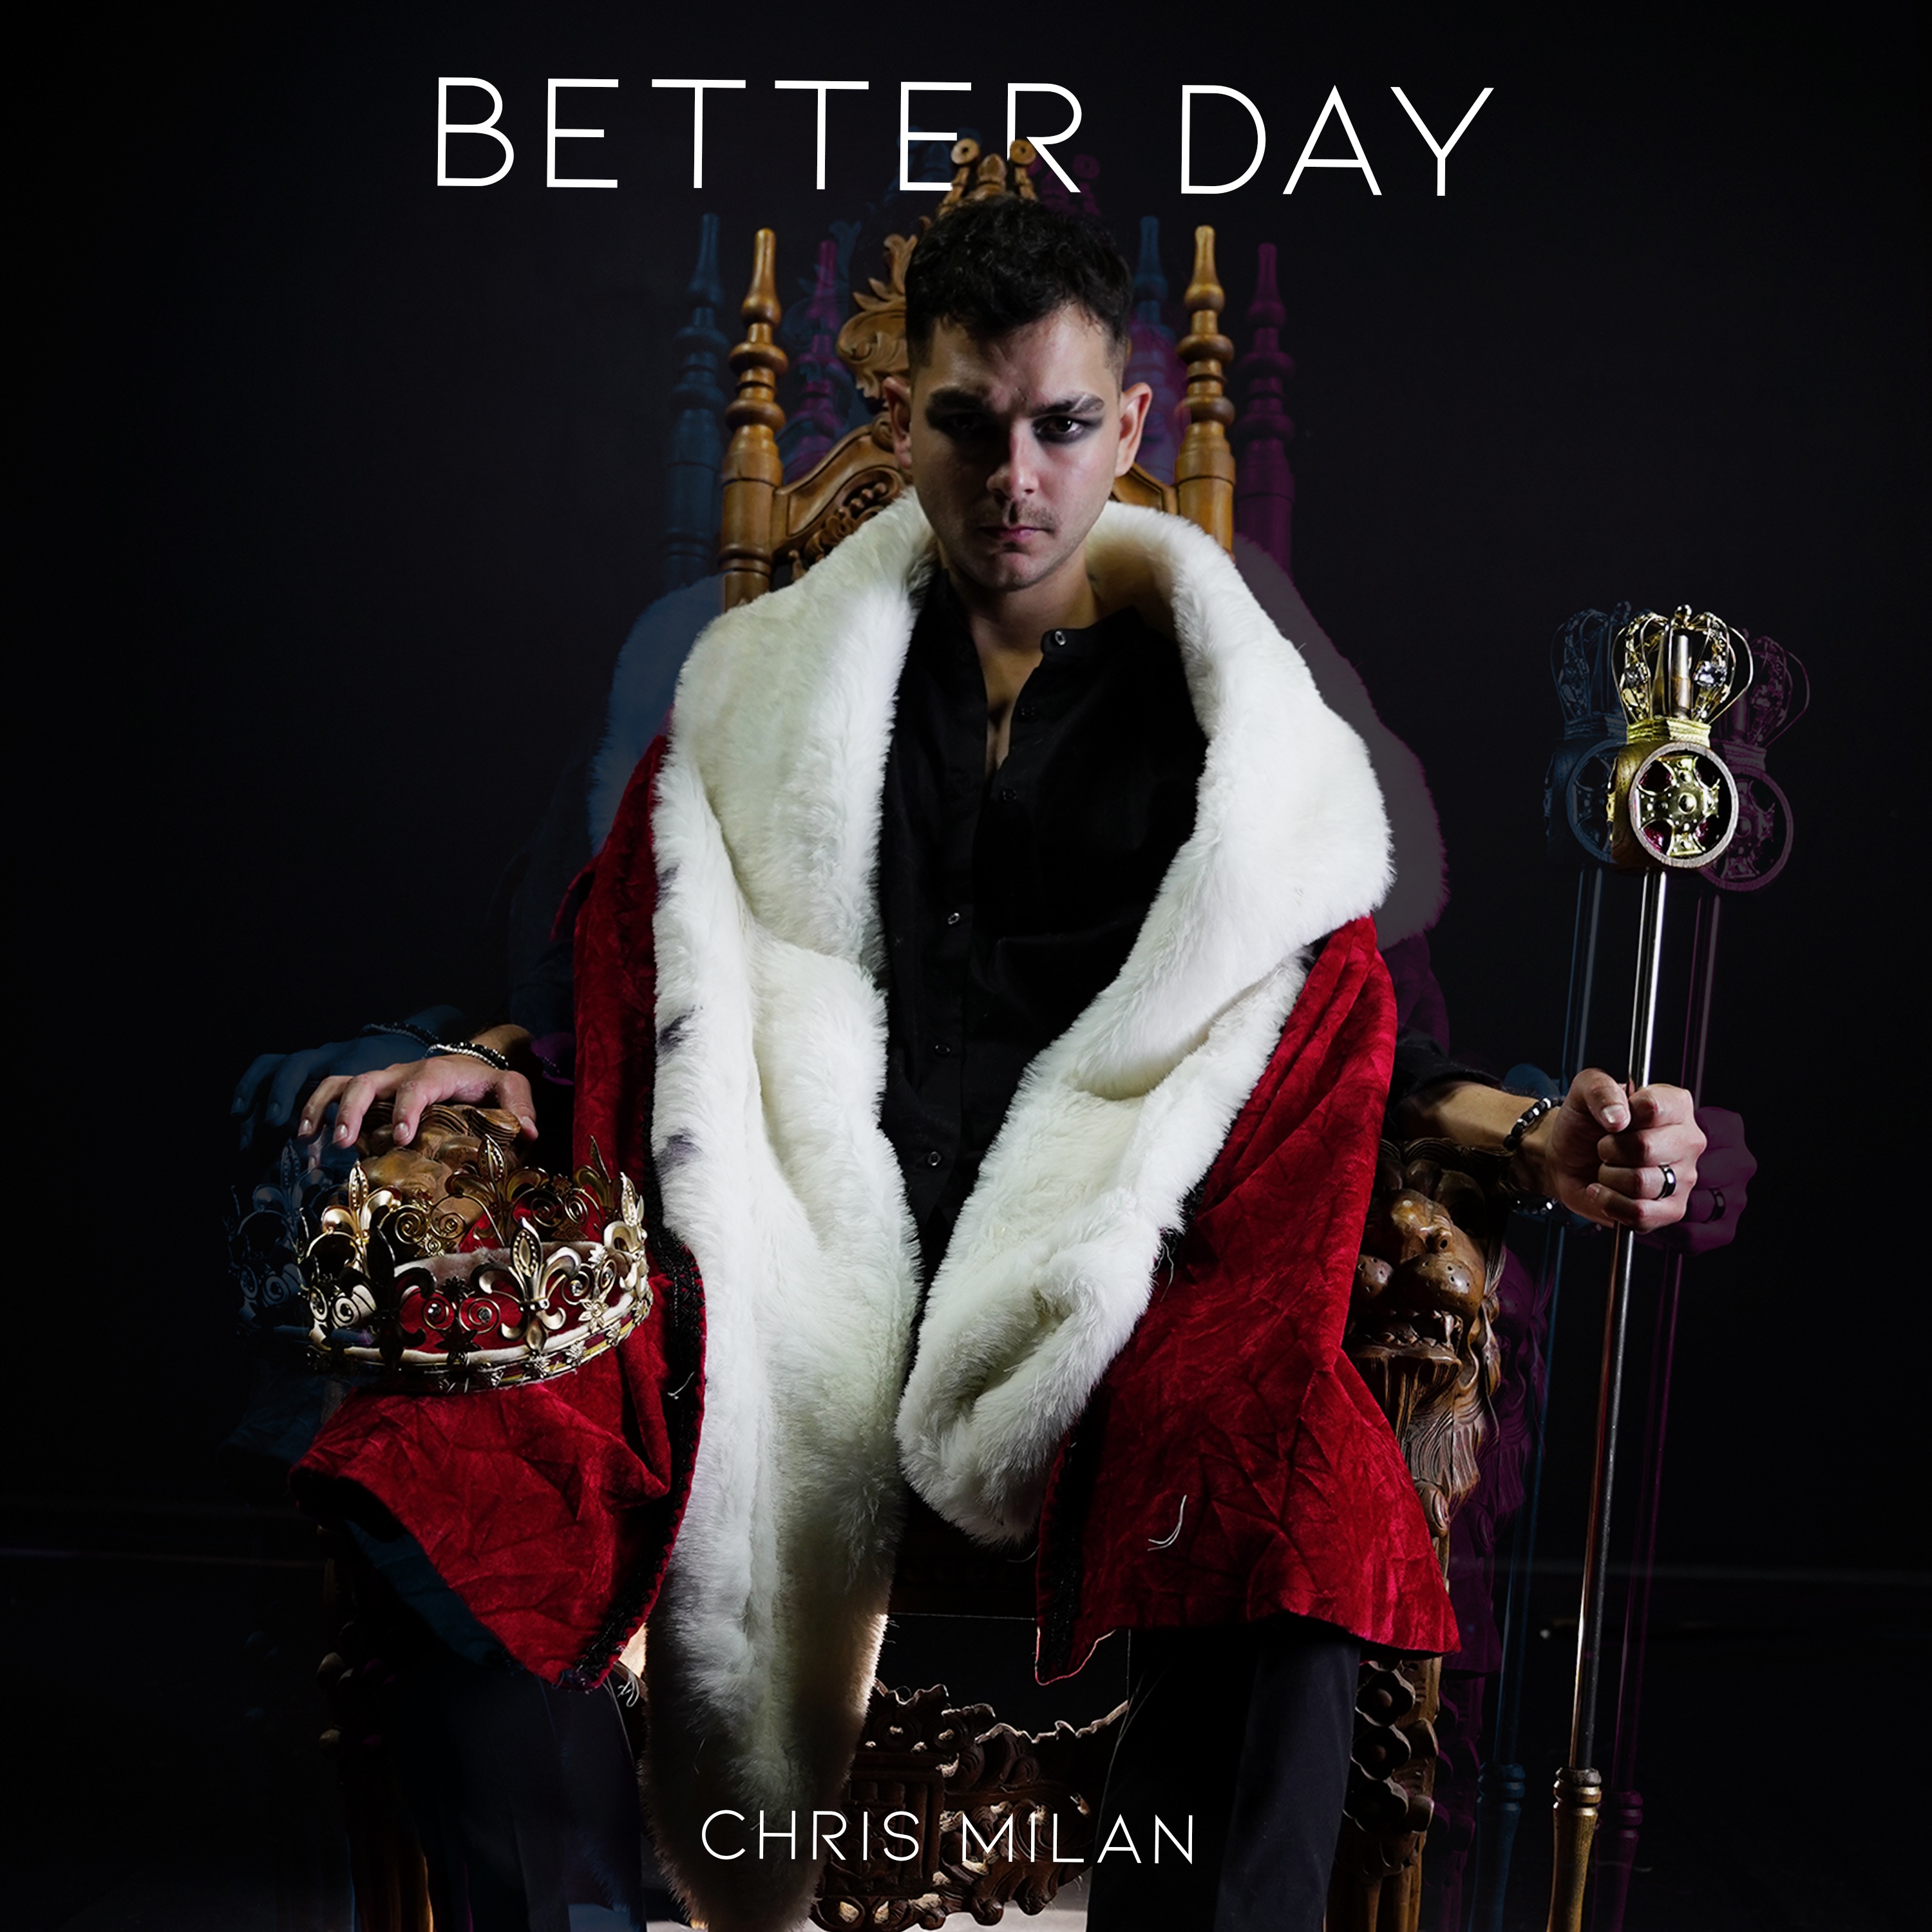 Chris Milan will release his single "Better Day"